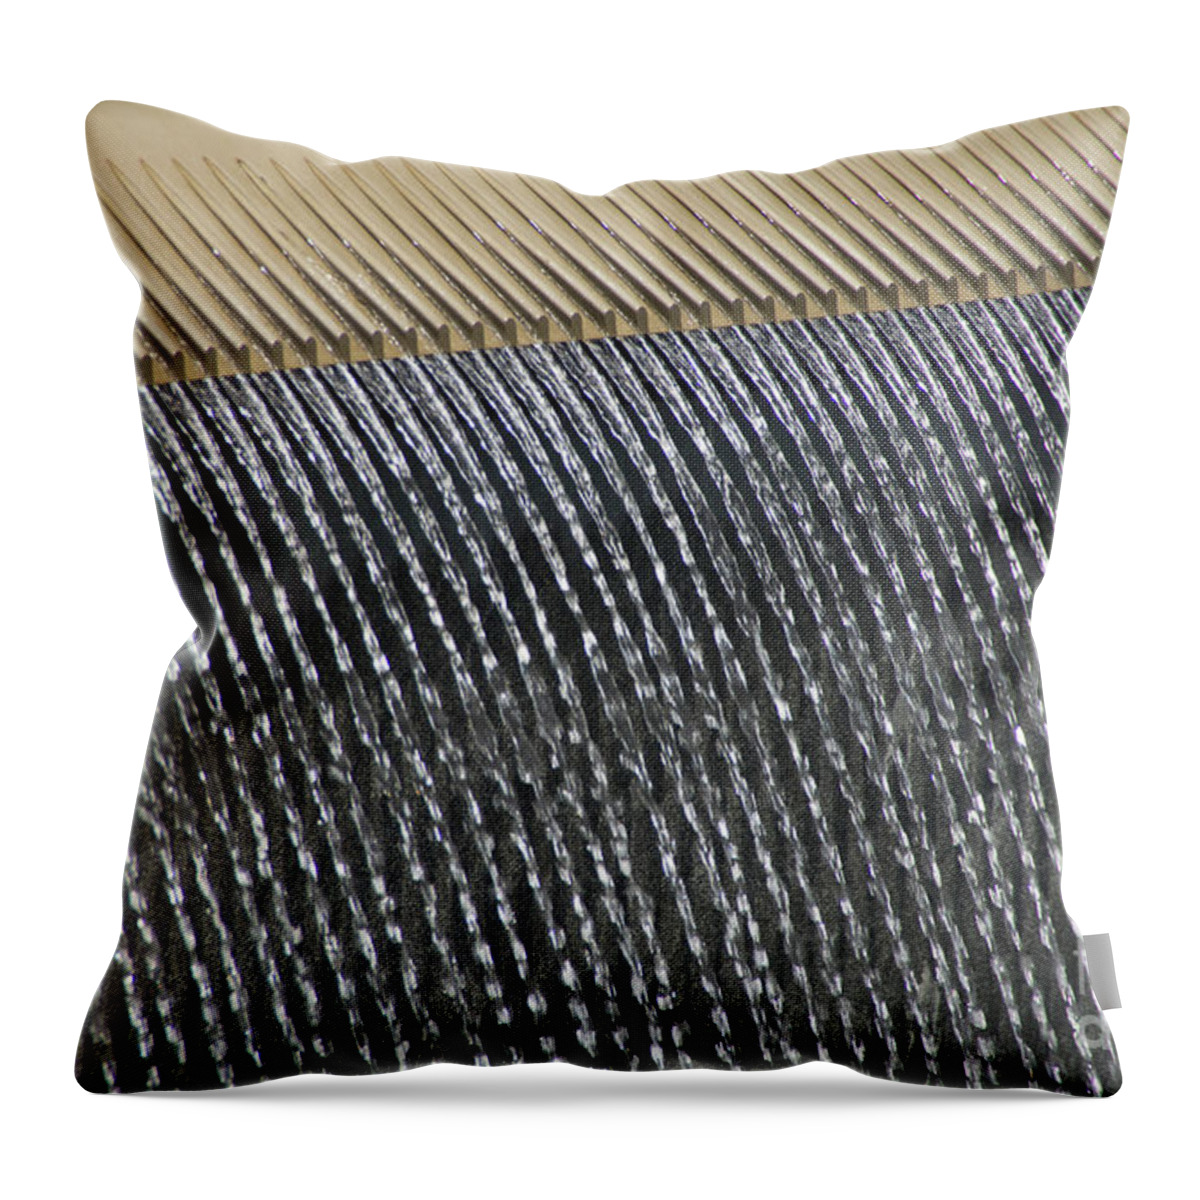 9/11 Throw Pillow featuring the photograph Too Many Tears by Scott Evers